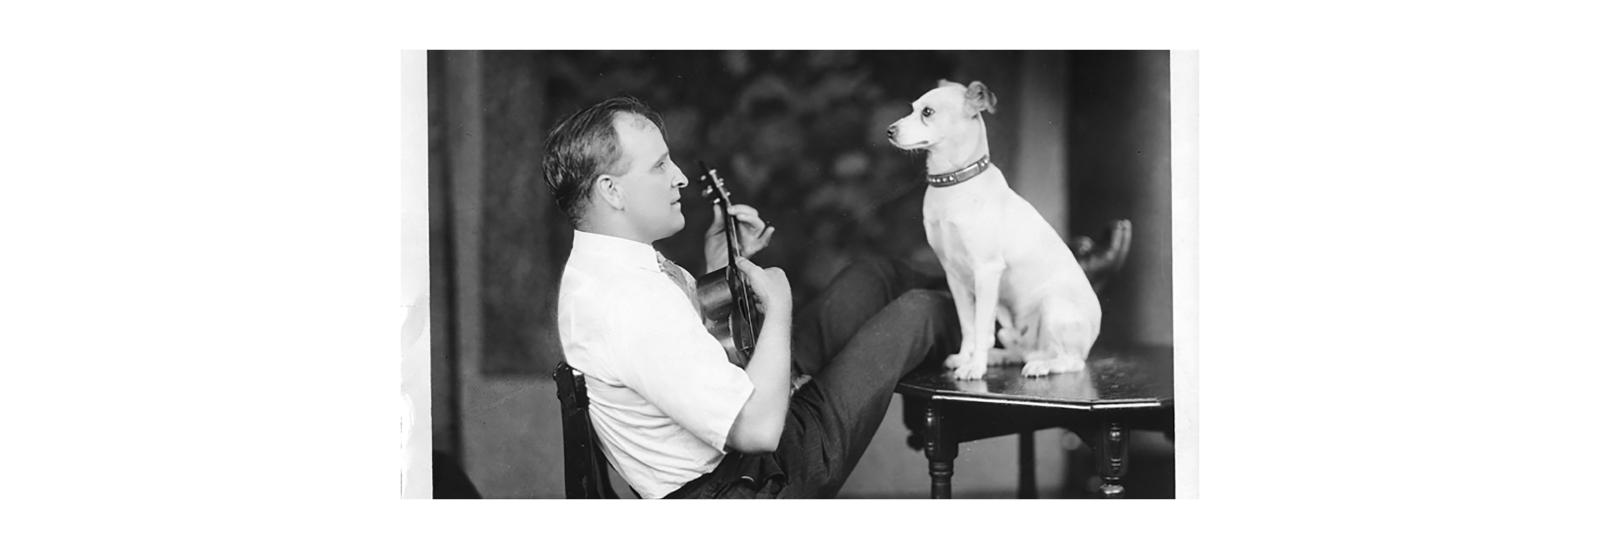 A man sitting at a table with his legs stretched on the table, playing a ukulele with a dog facing him sitting on the table in front of him.